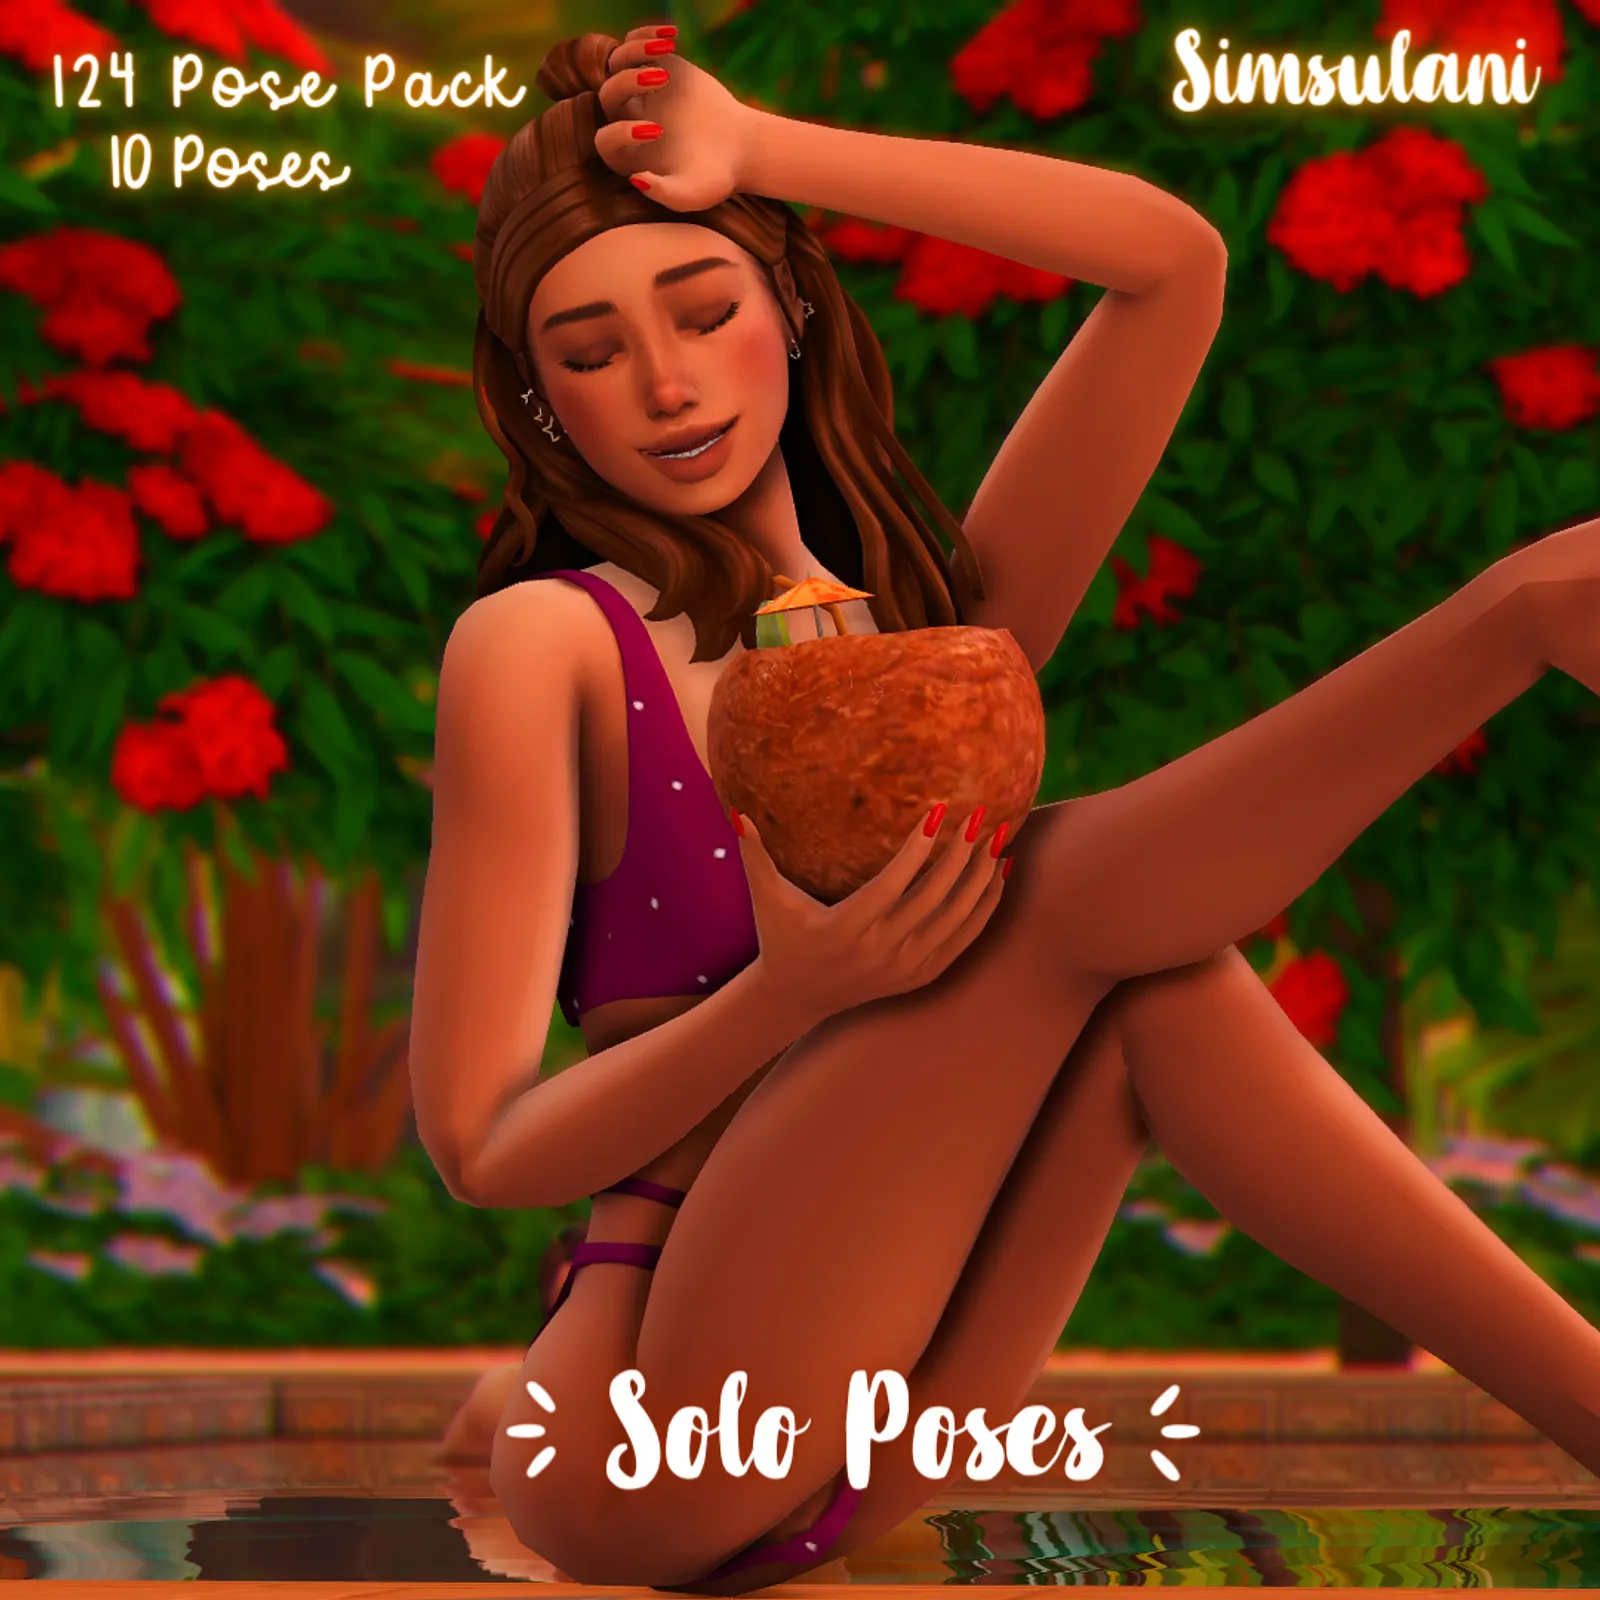 #124 Pose Pack : Solo Poses